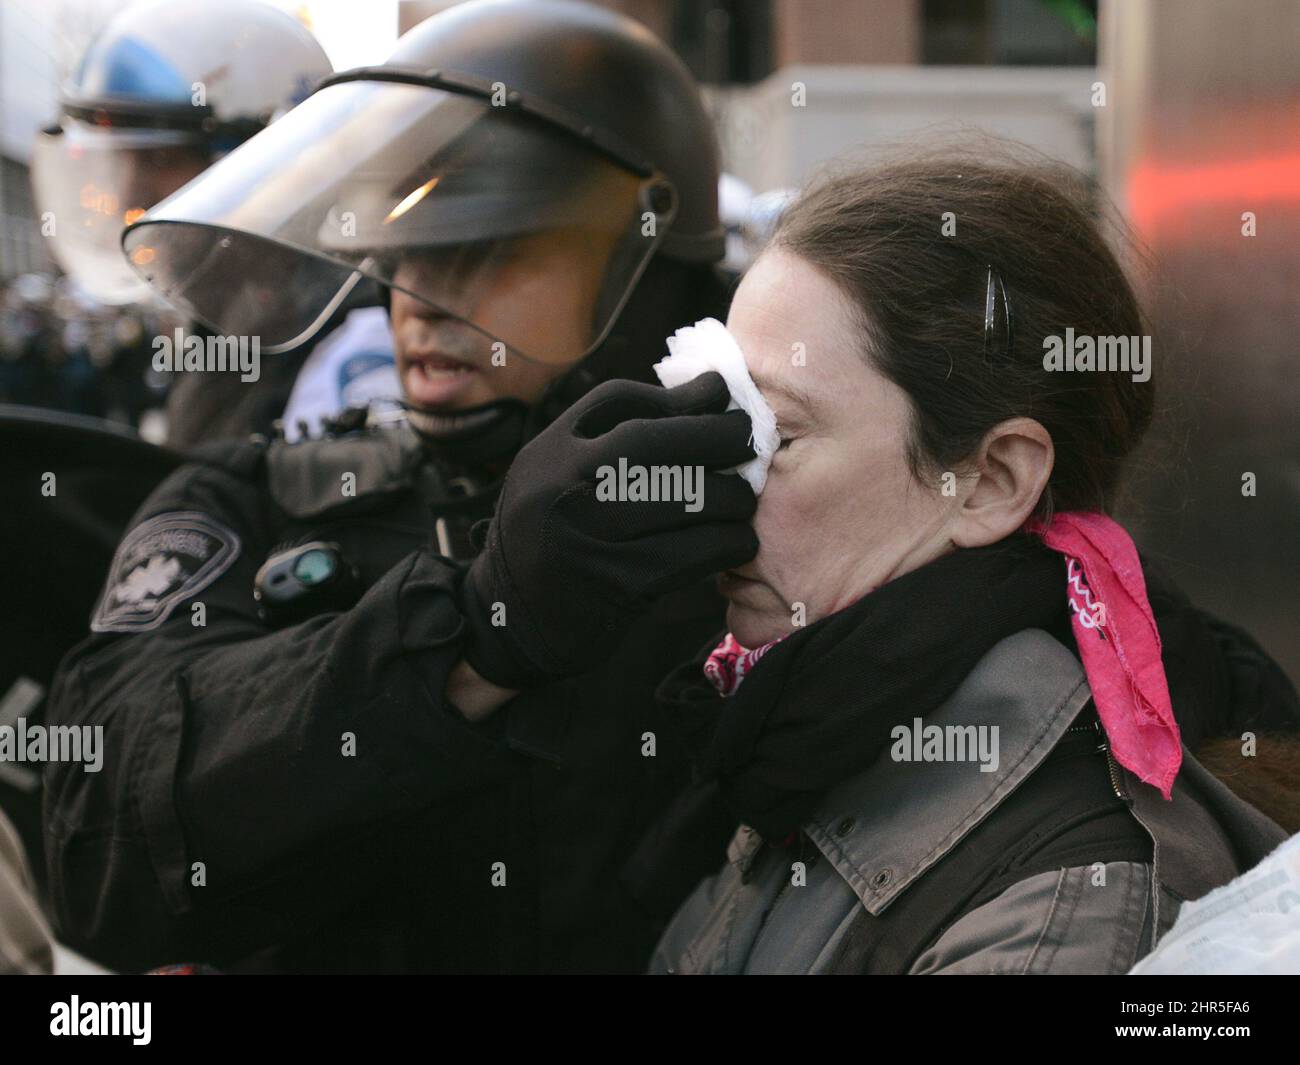 A riot police officer helps an injured woman during an anti-police brutality demonstration in Montreal on Friday March 15, 2013. Police used horses, pepper-spray and kettling tactics to clamp down Friday on an annual protest that has a history of getting rowdy.THE CANADIAN PRESS/Ryan Remiorz Stock Photo